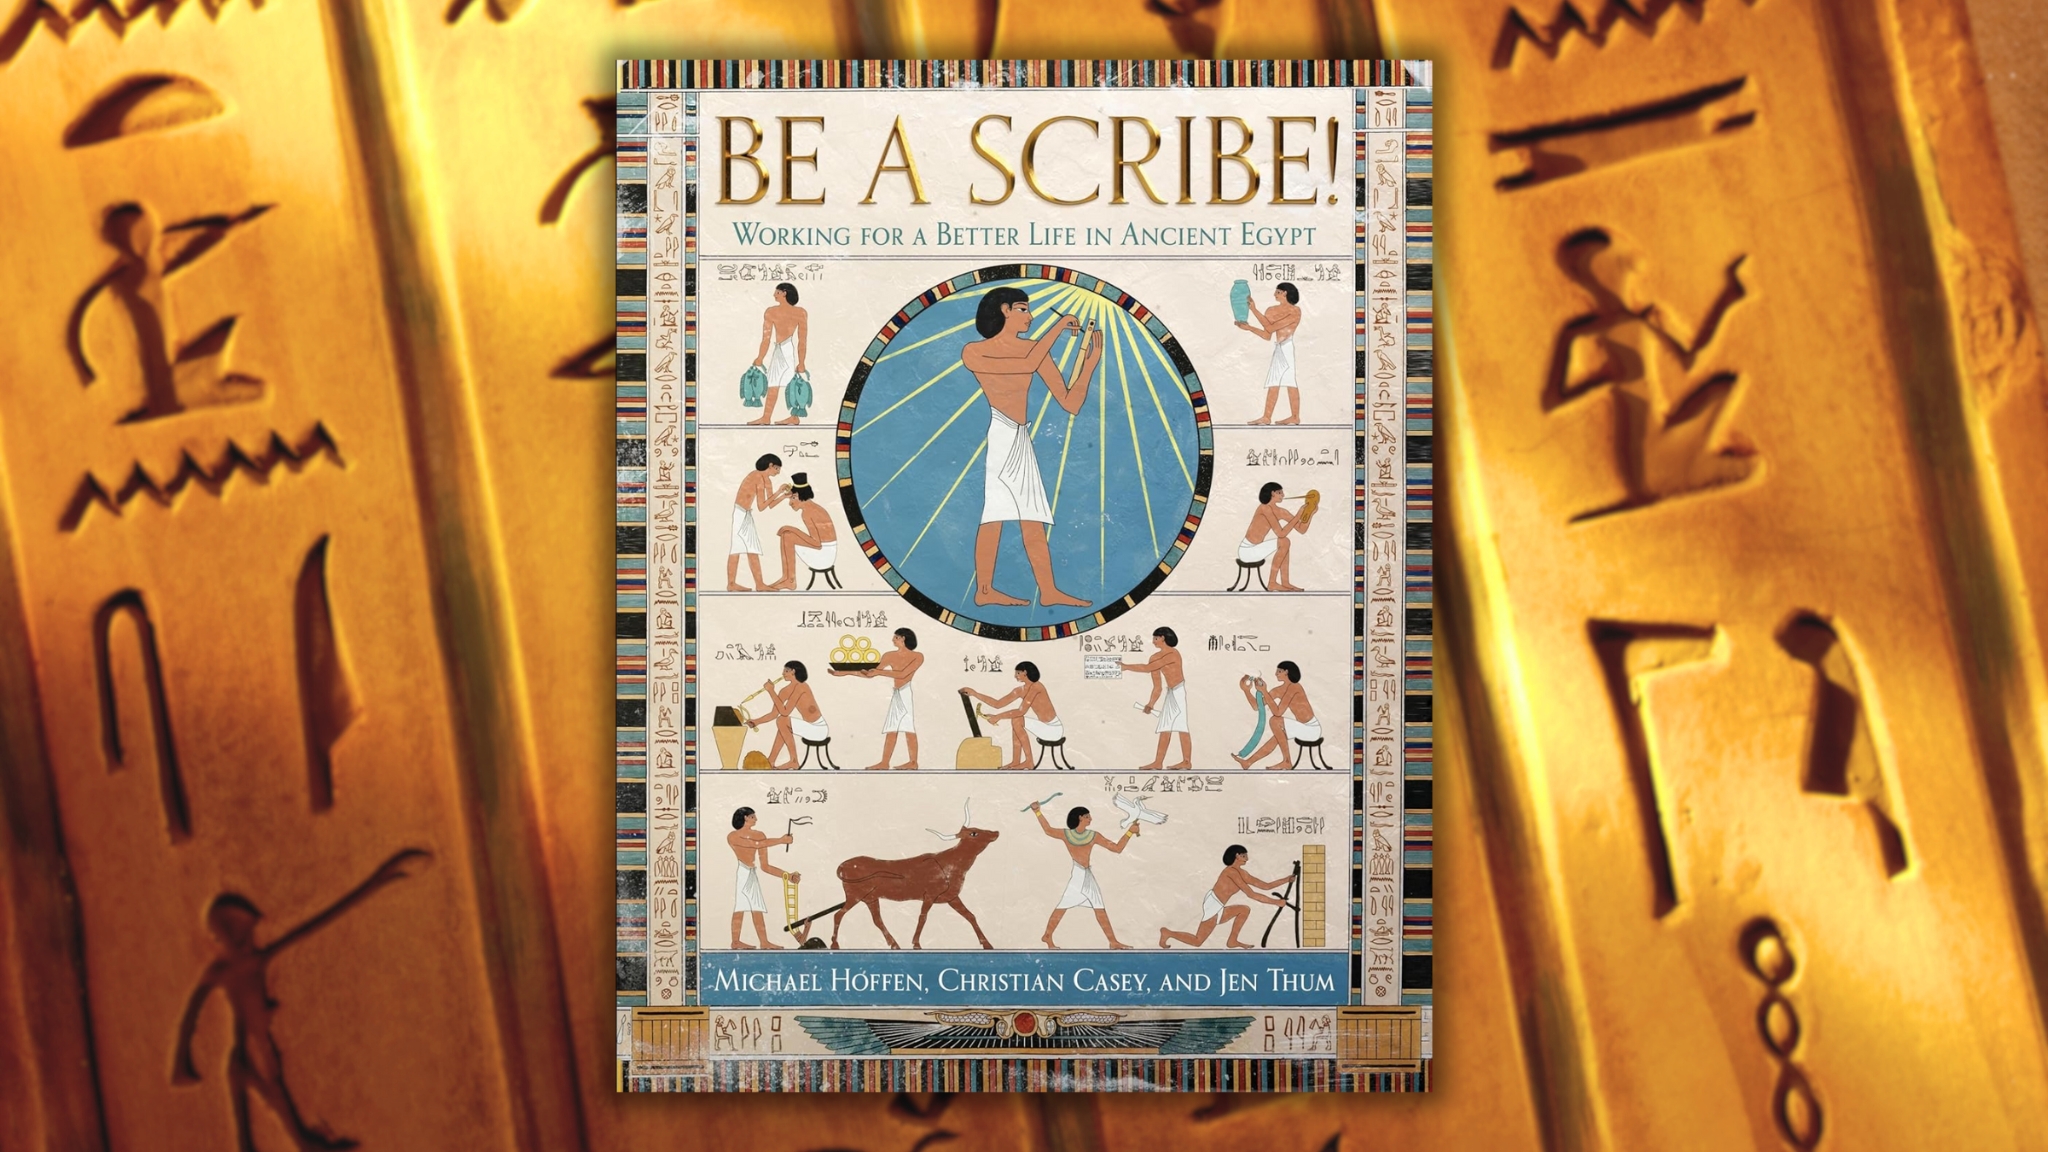 Be a Scribe by Michael Hoffen